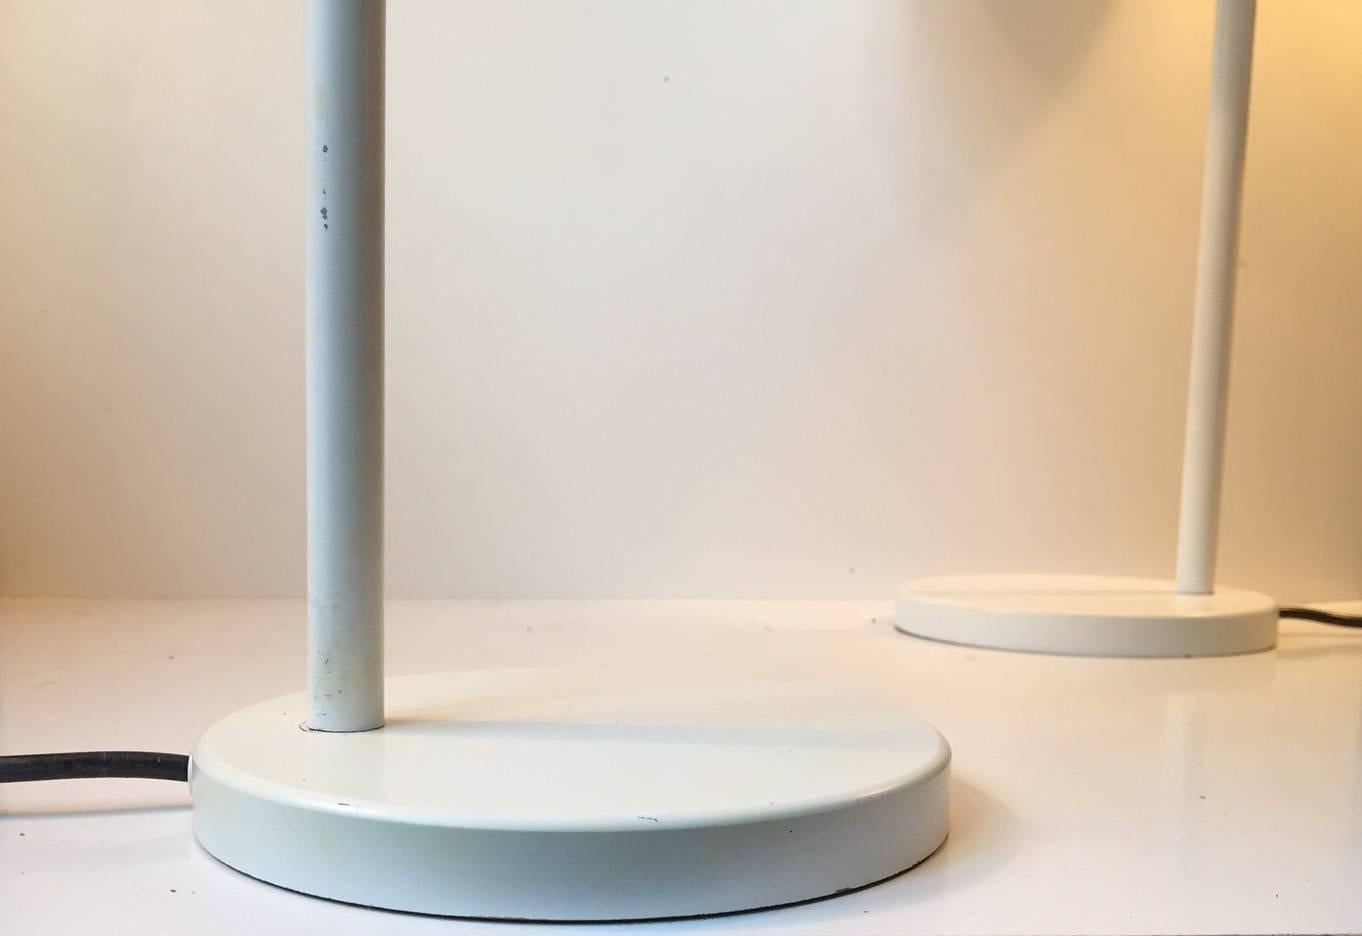 A pair of rare 'Combi' table or desk lamps designed by Danish architect Per Iversen in 1967. Manufactured by Louis Poulsen in Denmark during the 1960s-early 1980s. Very similar in construction to Hans Jorgen Wegner's Opala series with its